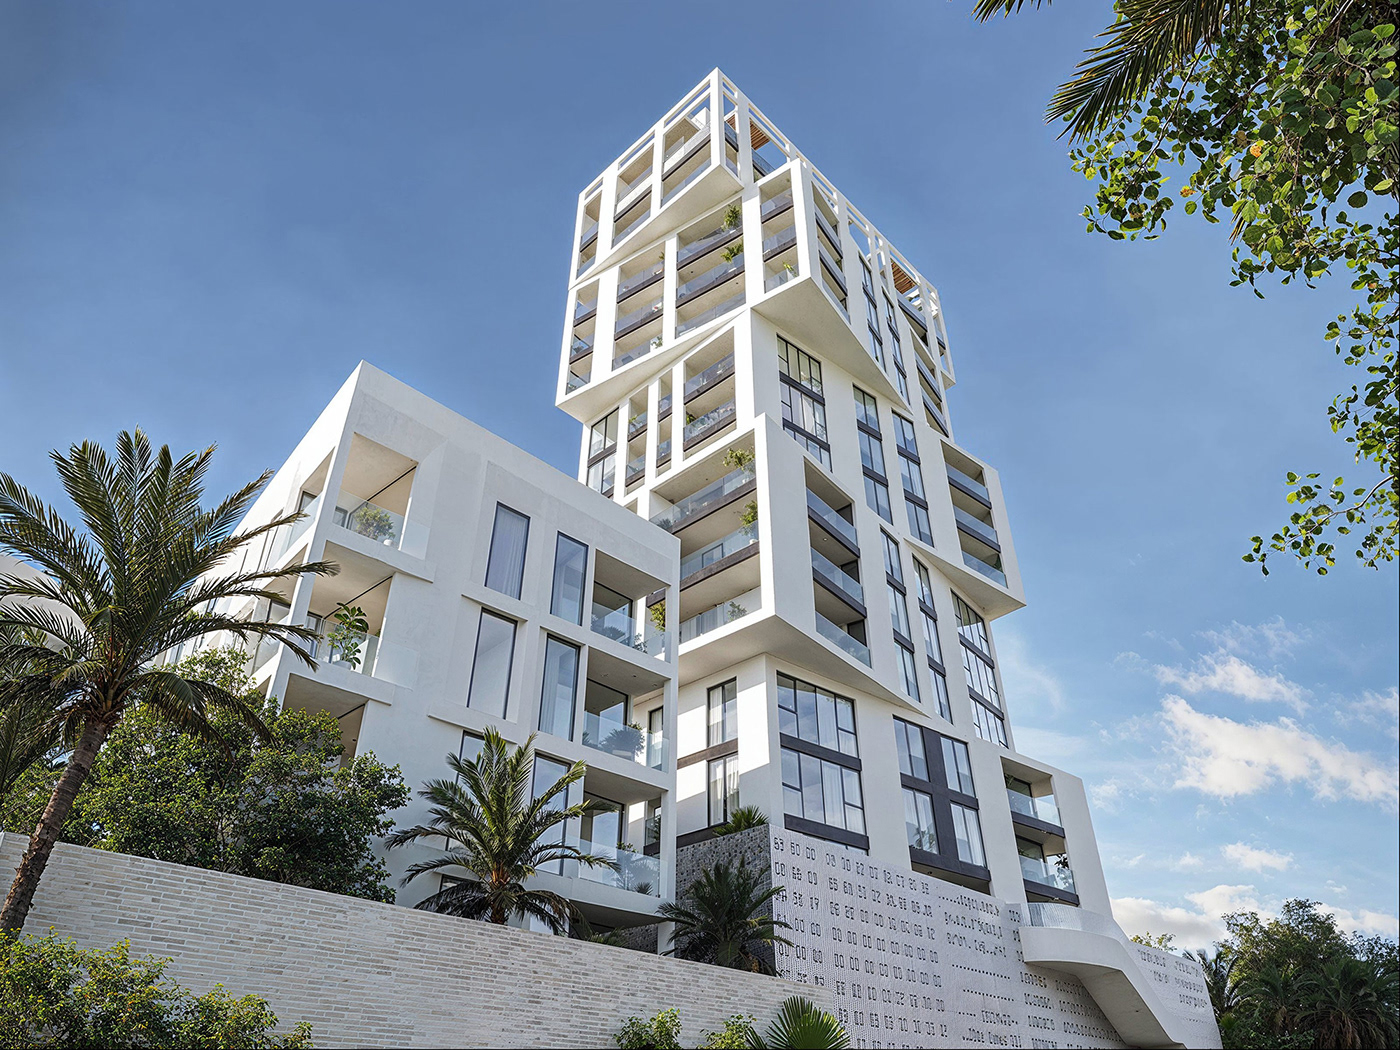 bitcoin skyscraper residential exterior beach tower High-rise Building architectural design visualization The Gambia